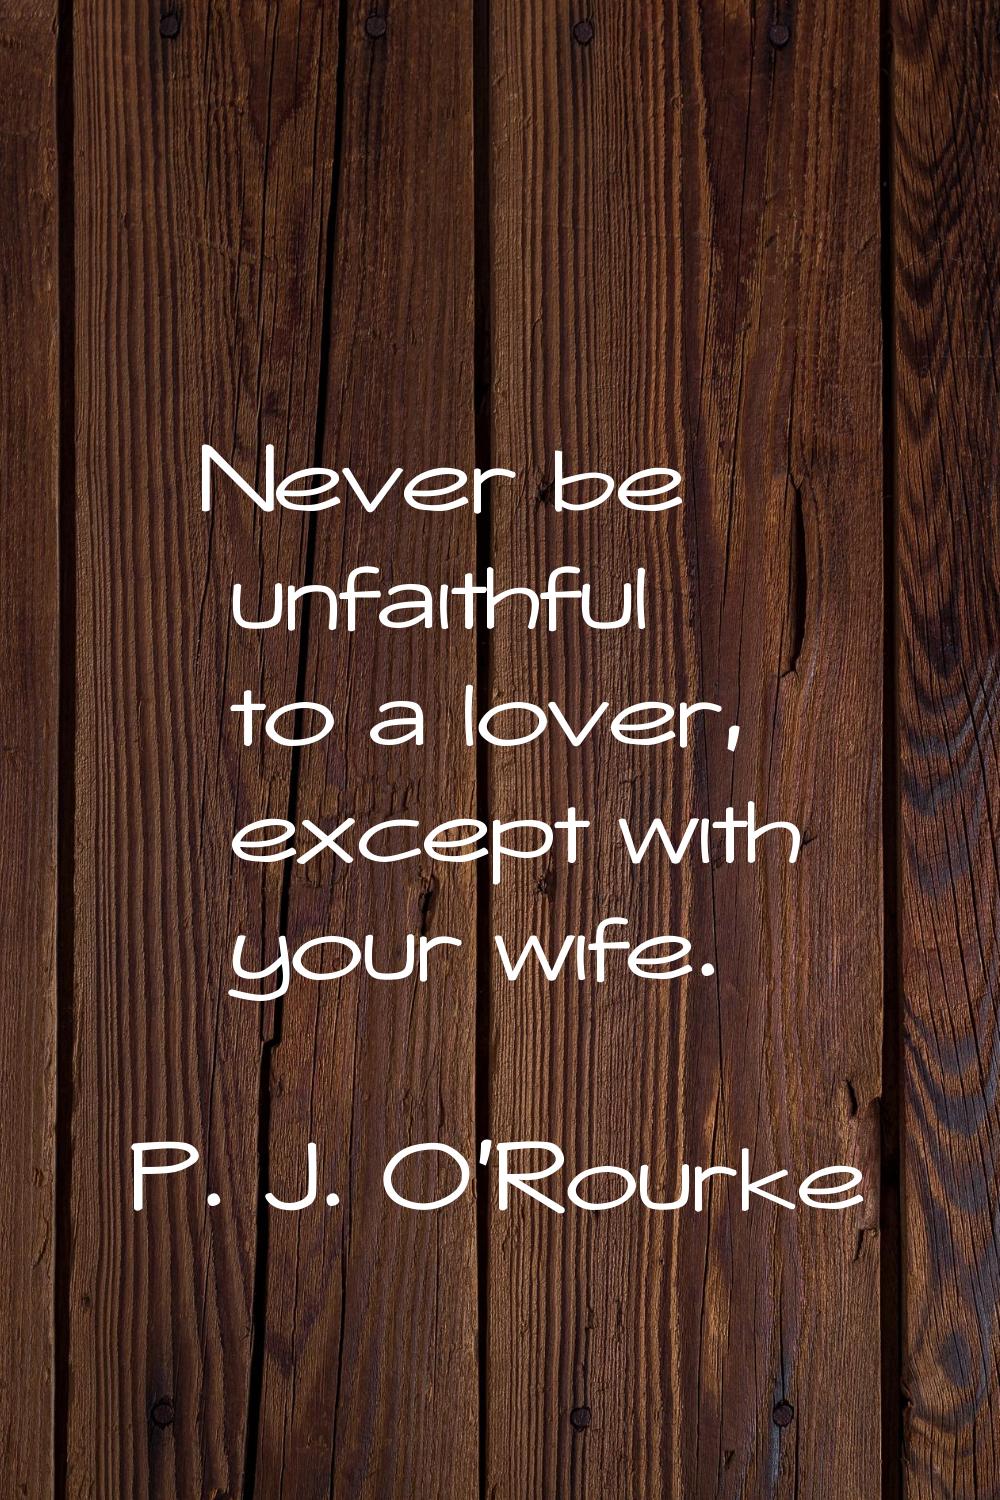 Never be unfaithful to a lover, except with your wife.